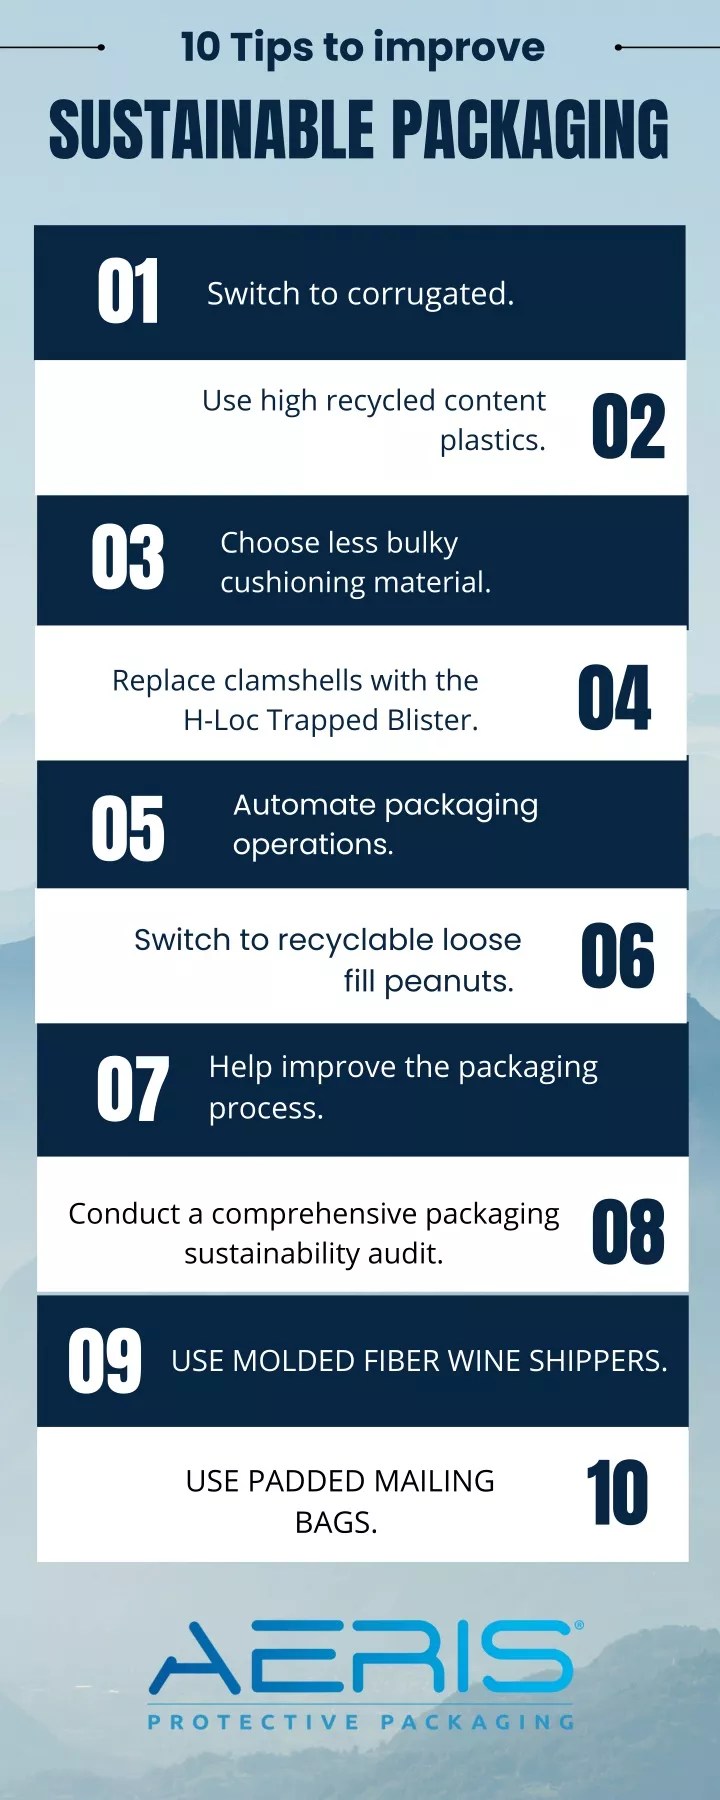 10 tips to improve sustainable packaging